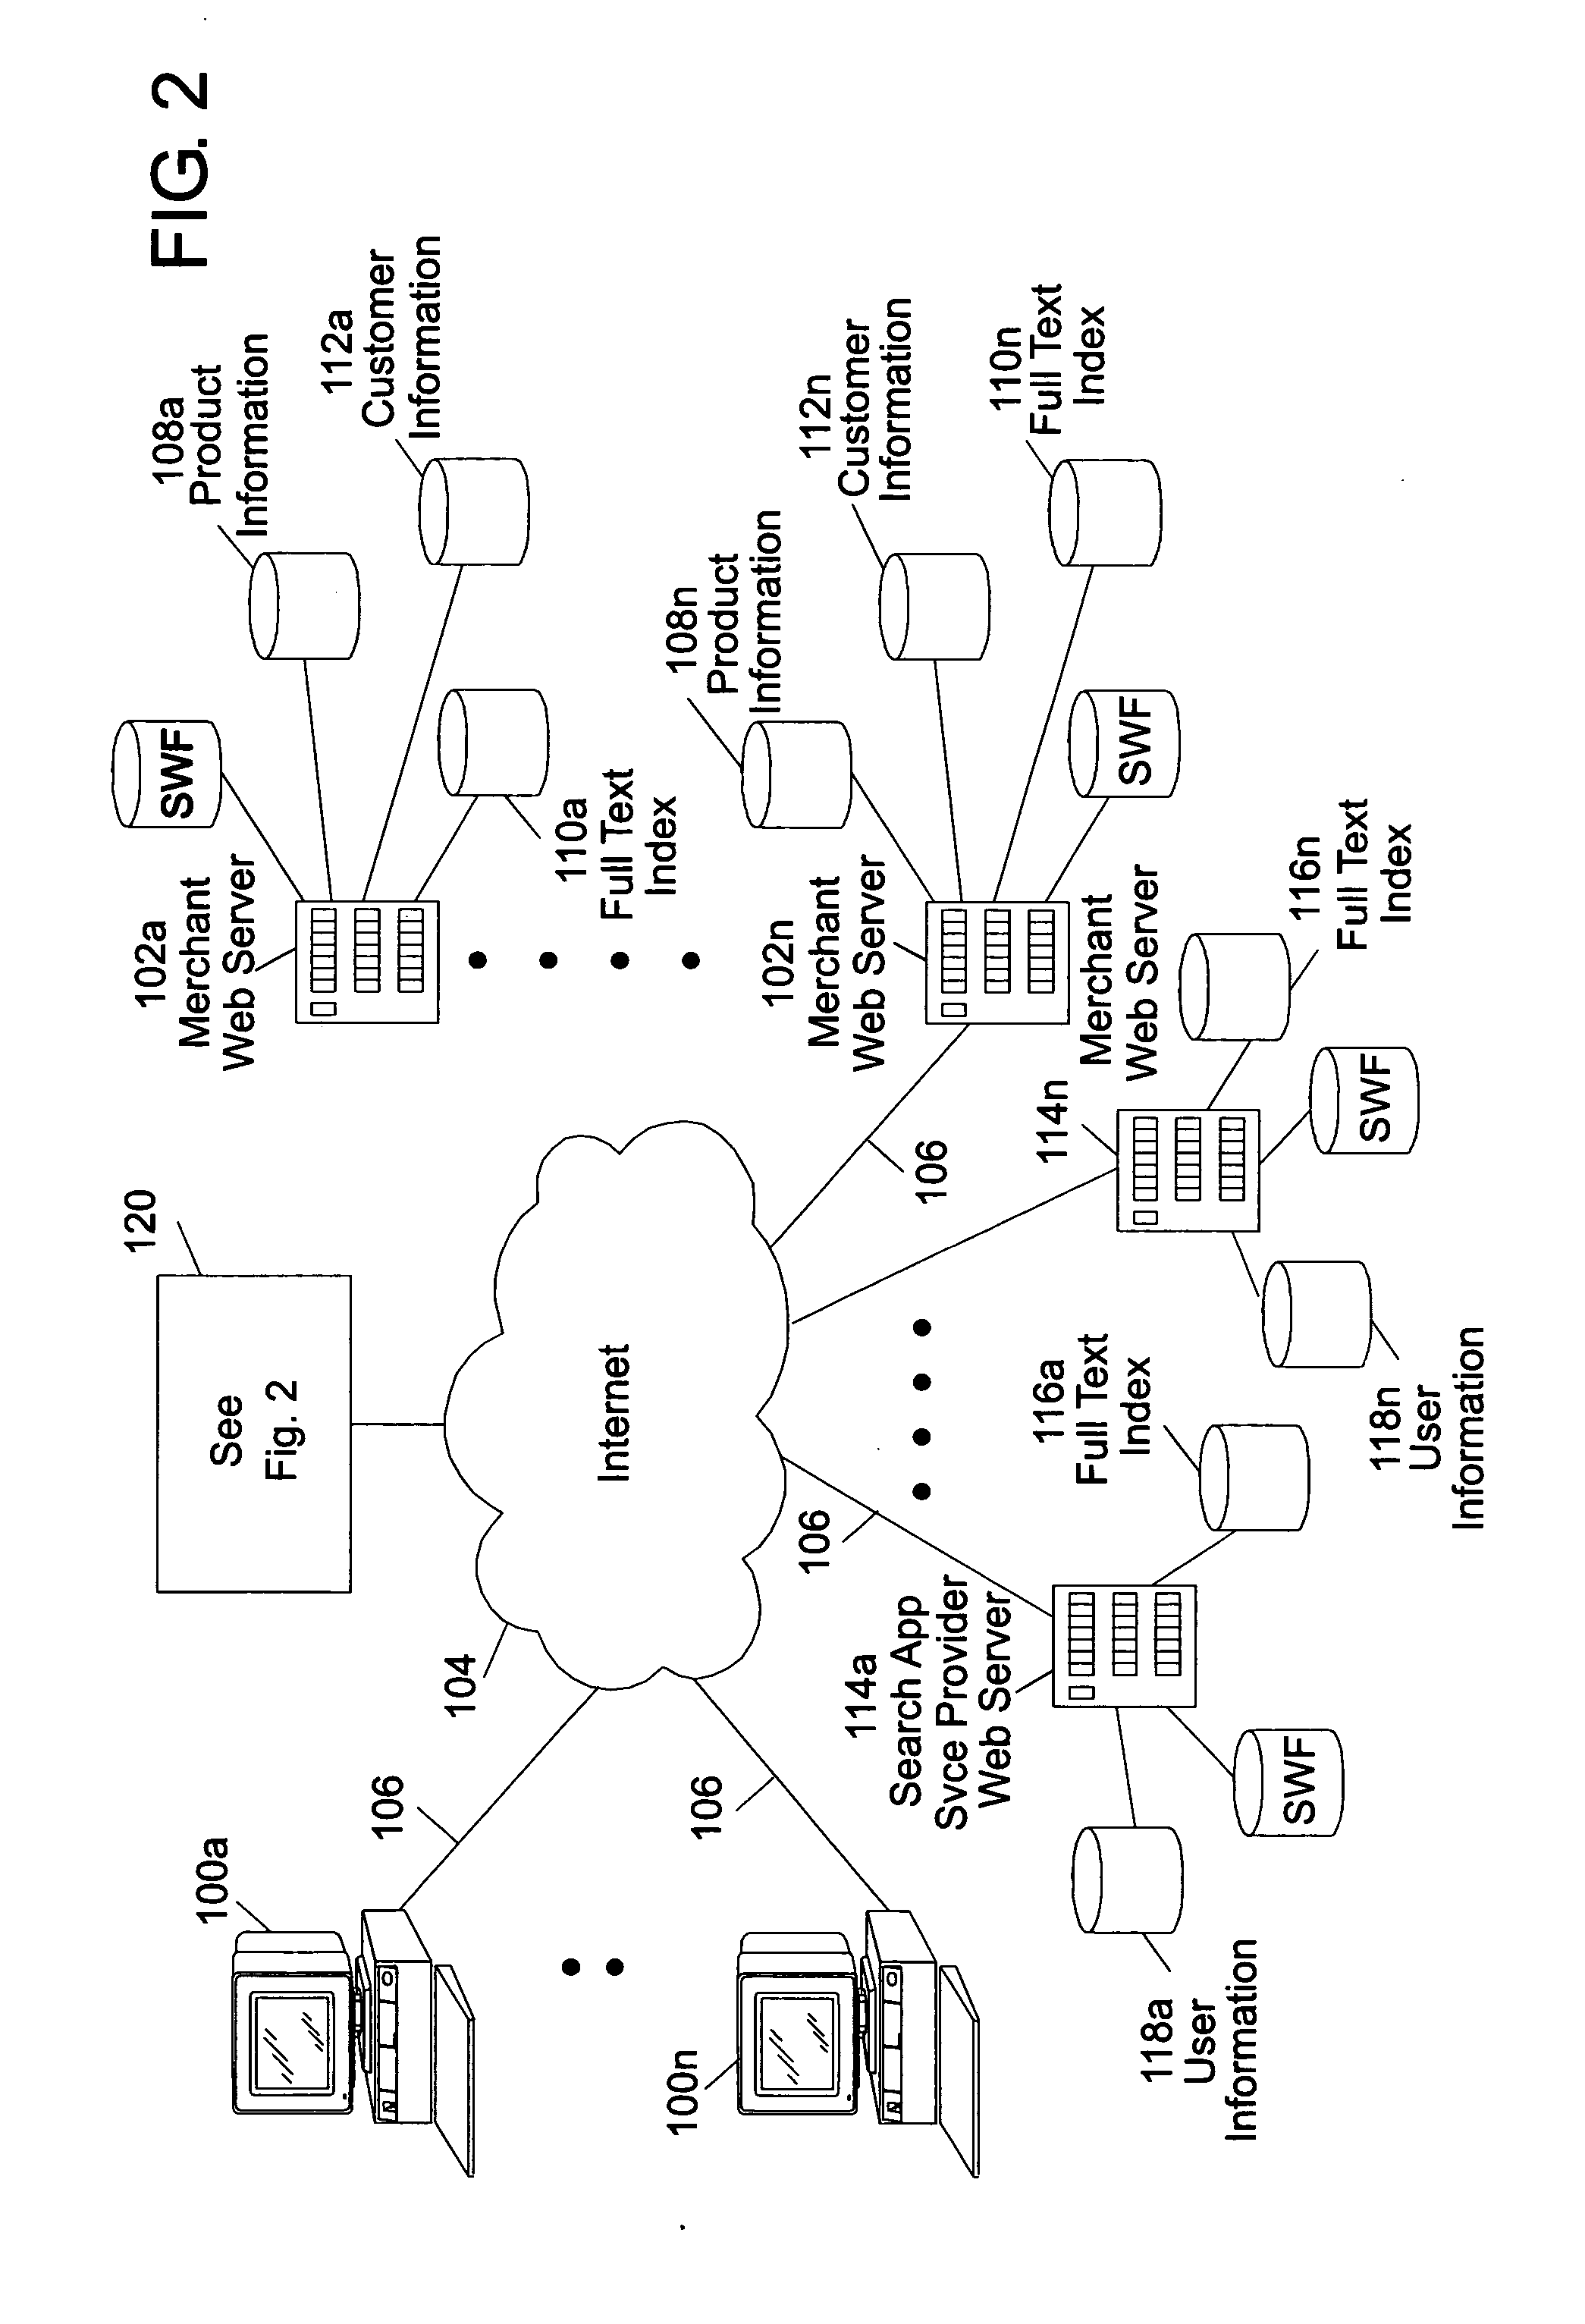 Method of search content enhancement